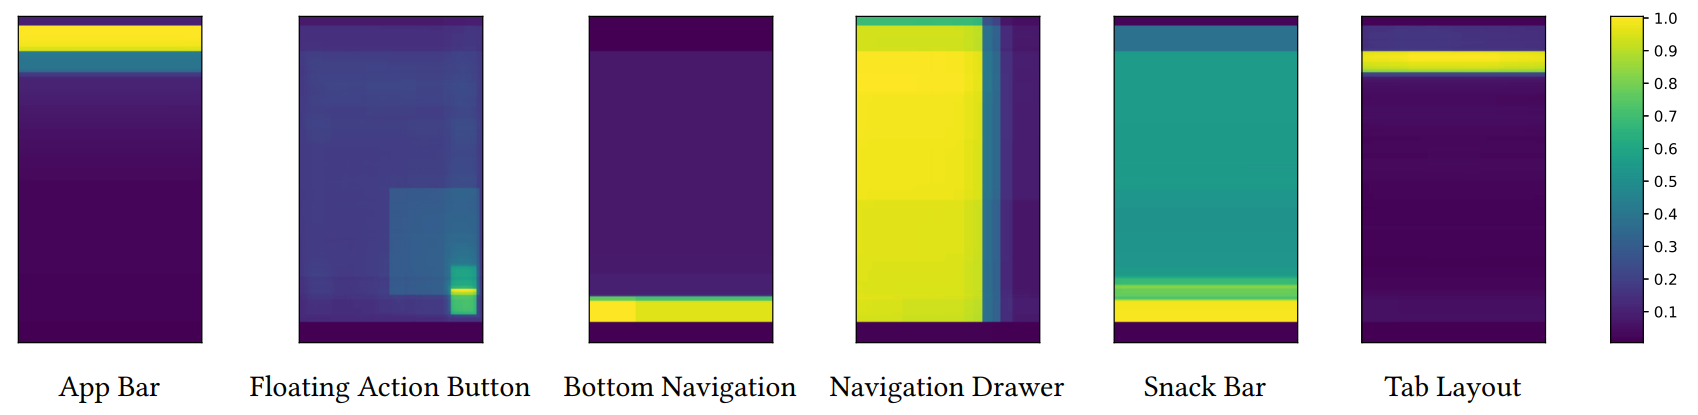 The heatmap of the frequency divided by maximum value of each Material Design element in Rico dataset